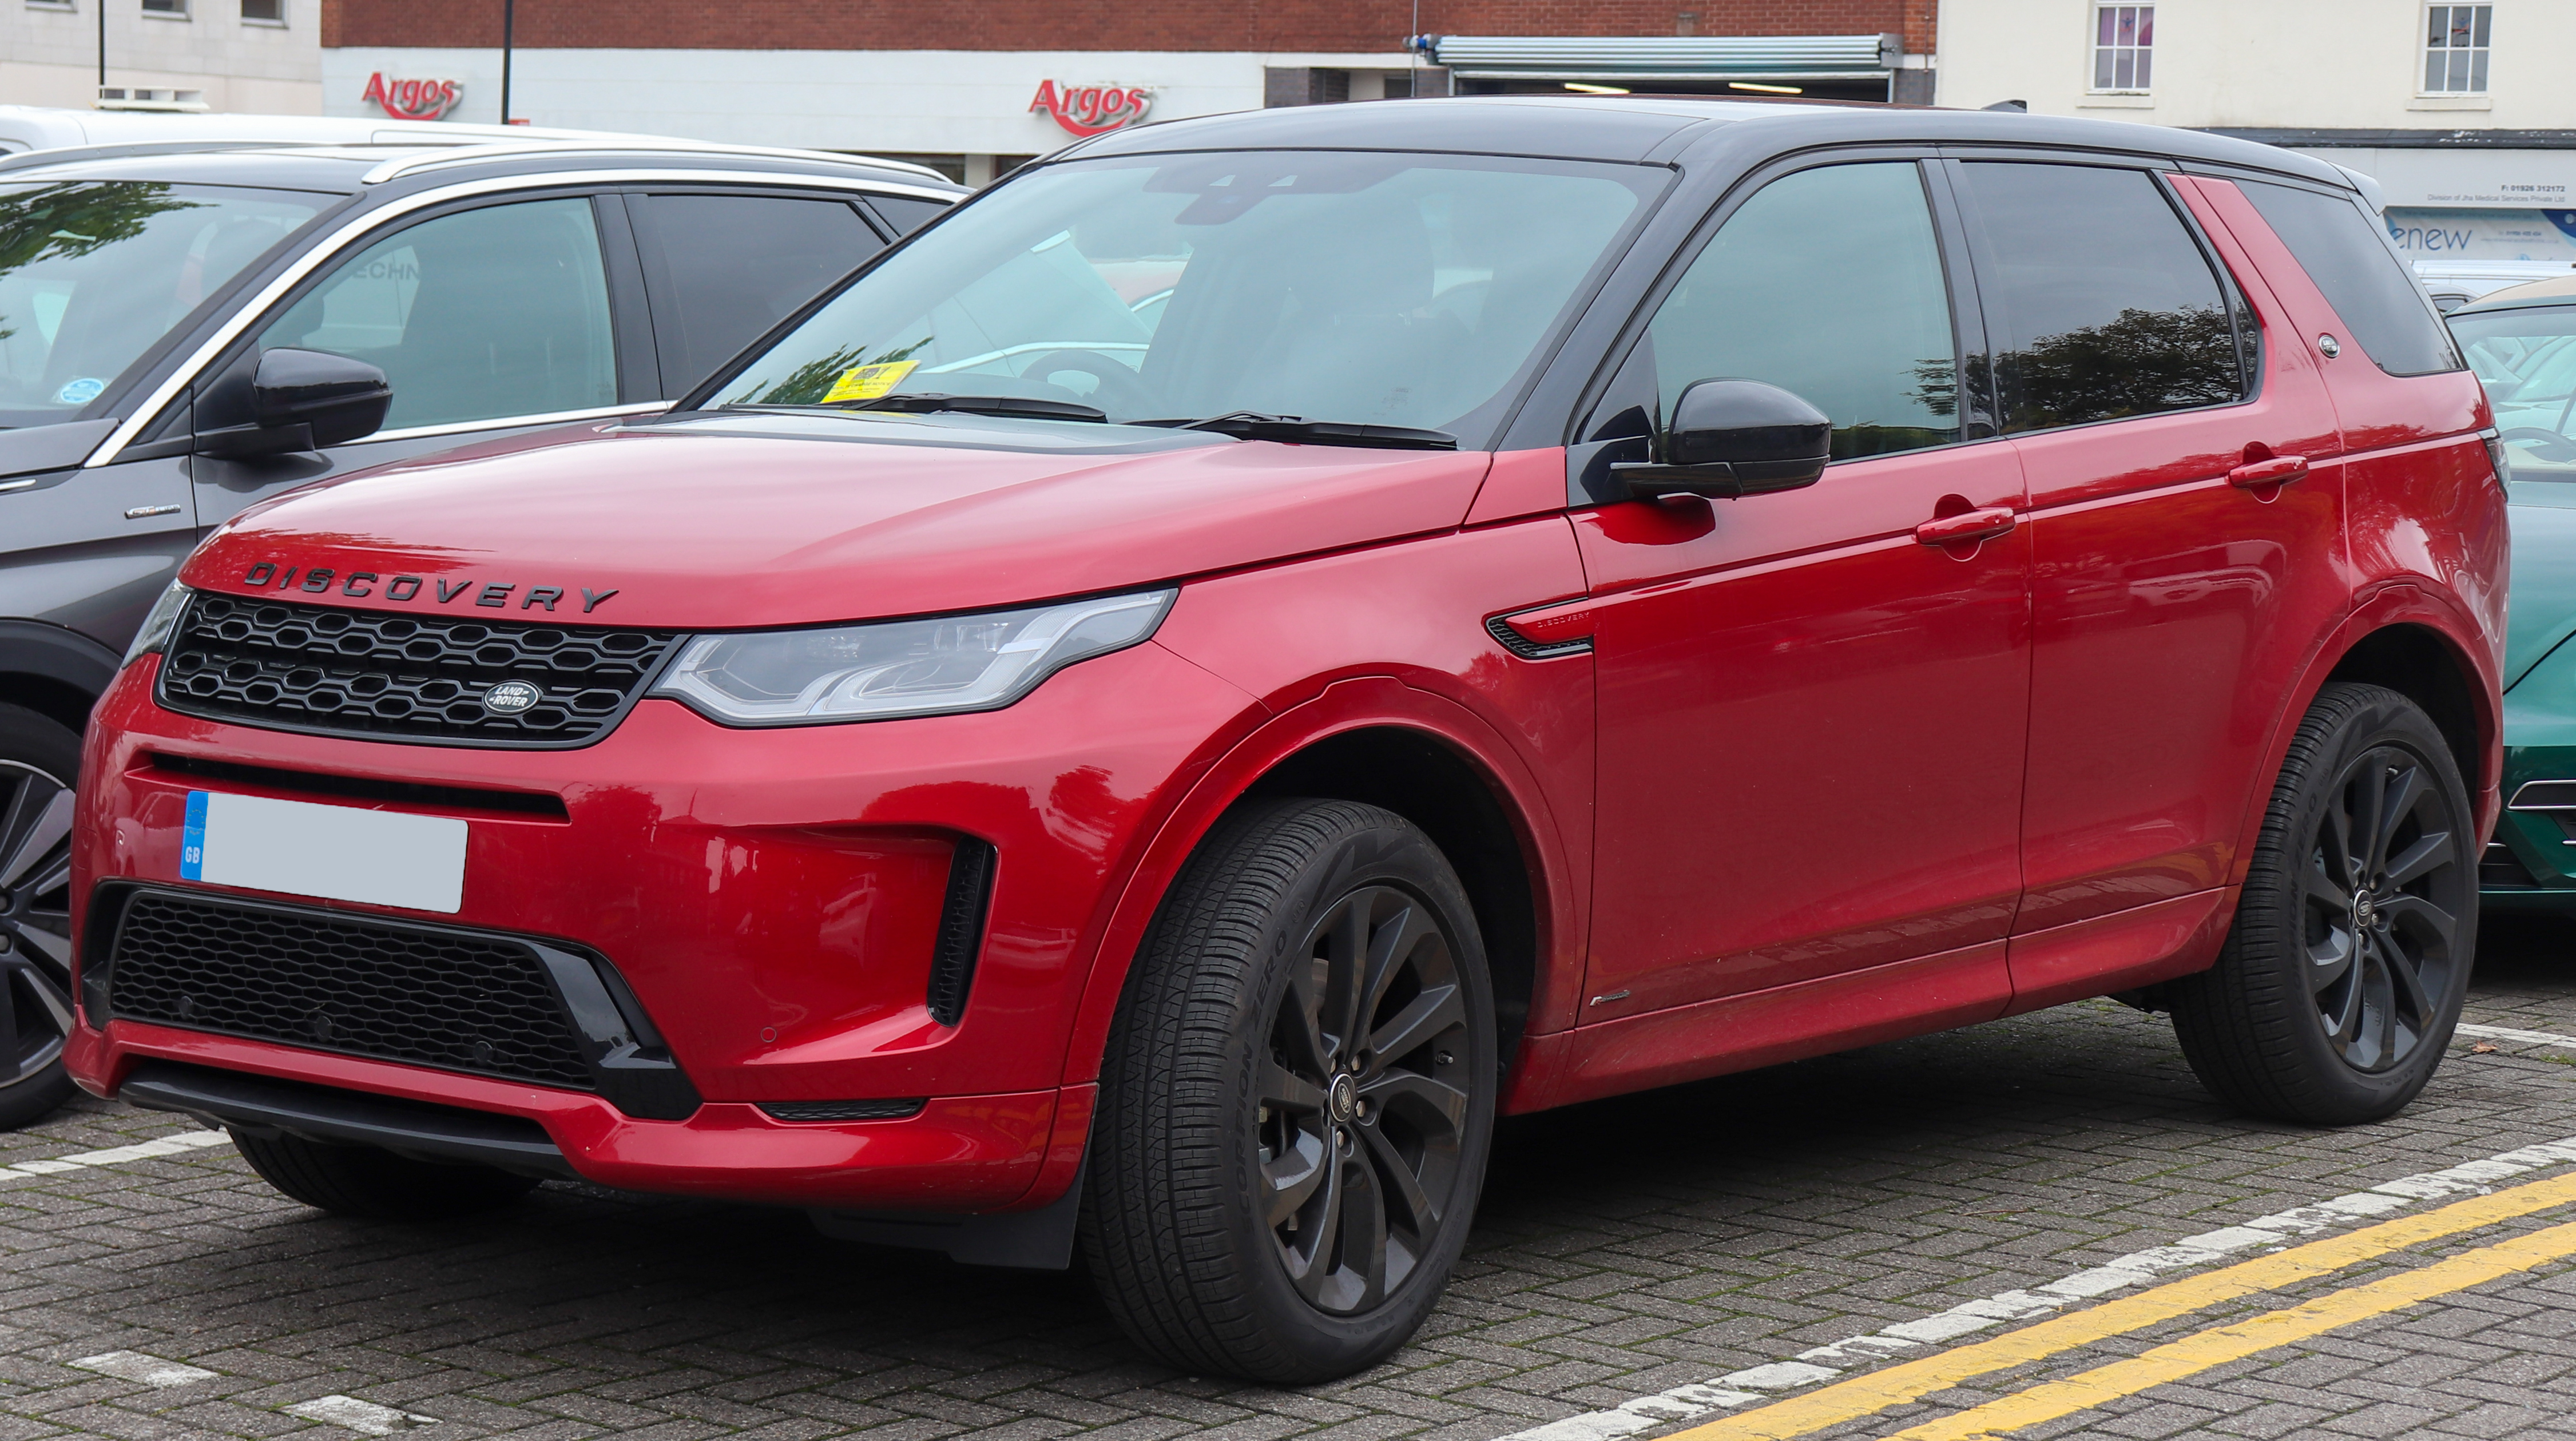 Range Rover Evoque Used Liverpool  : It�s All Seamlessly Integrated Using Trifield™ Technology, So You Can Sit Back And Absorb Every Detail.